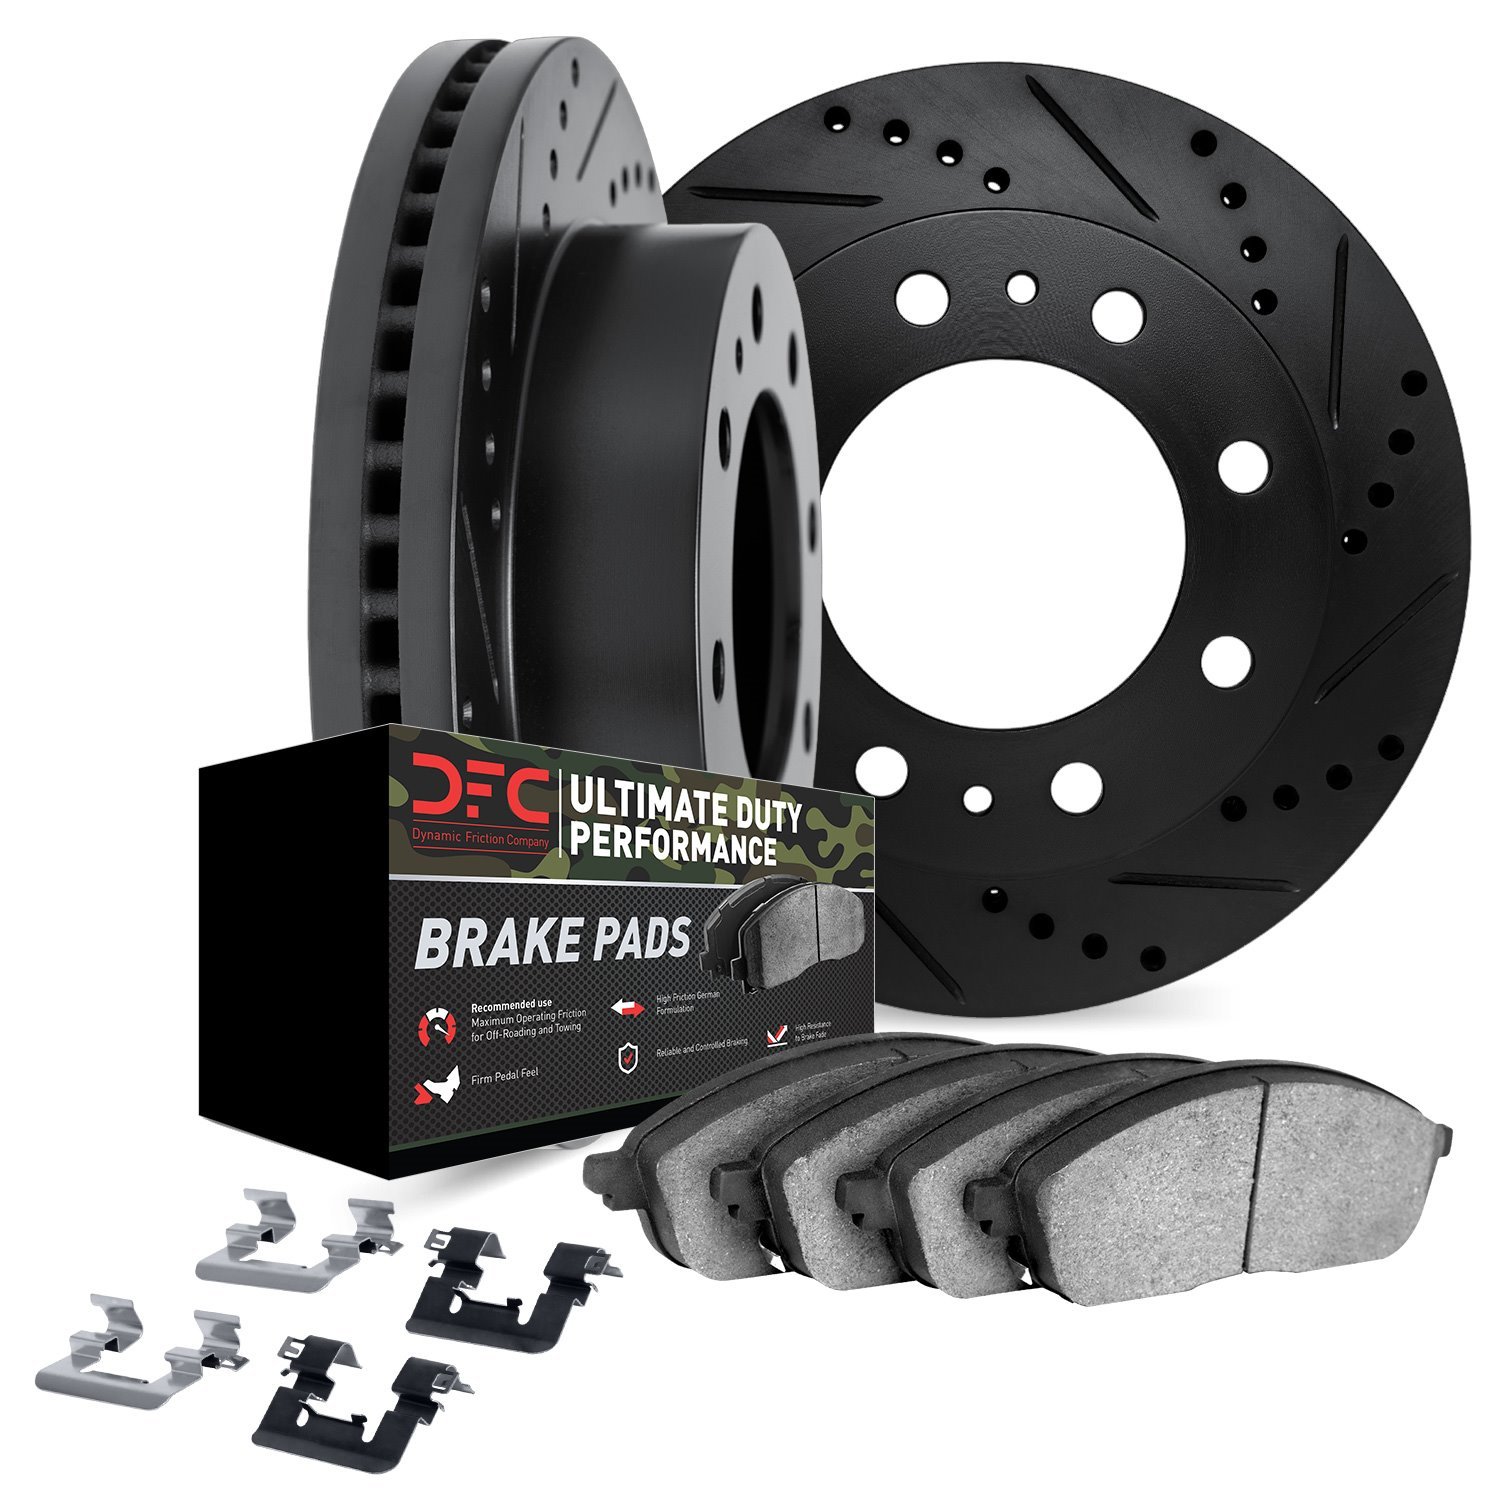 8412-54098 Drilled/Slotted Brake Rotors with Ultimate-Duty Brake Pads Kit & Hardware [Black], Fits Select Ford/Lincoln/Mercury/M